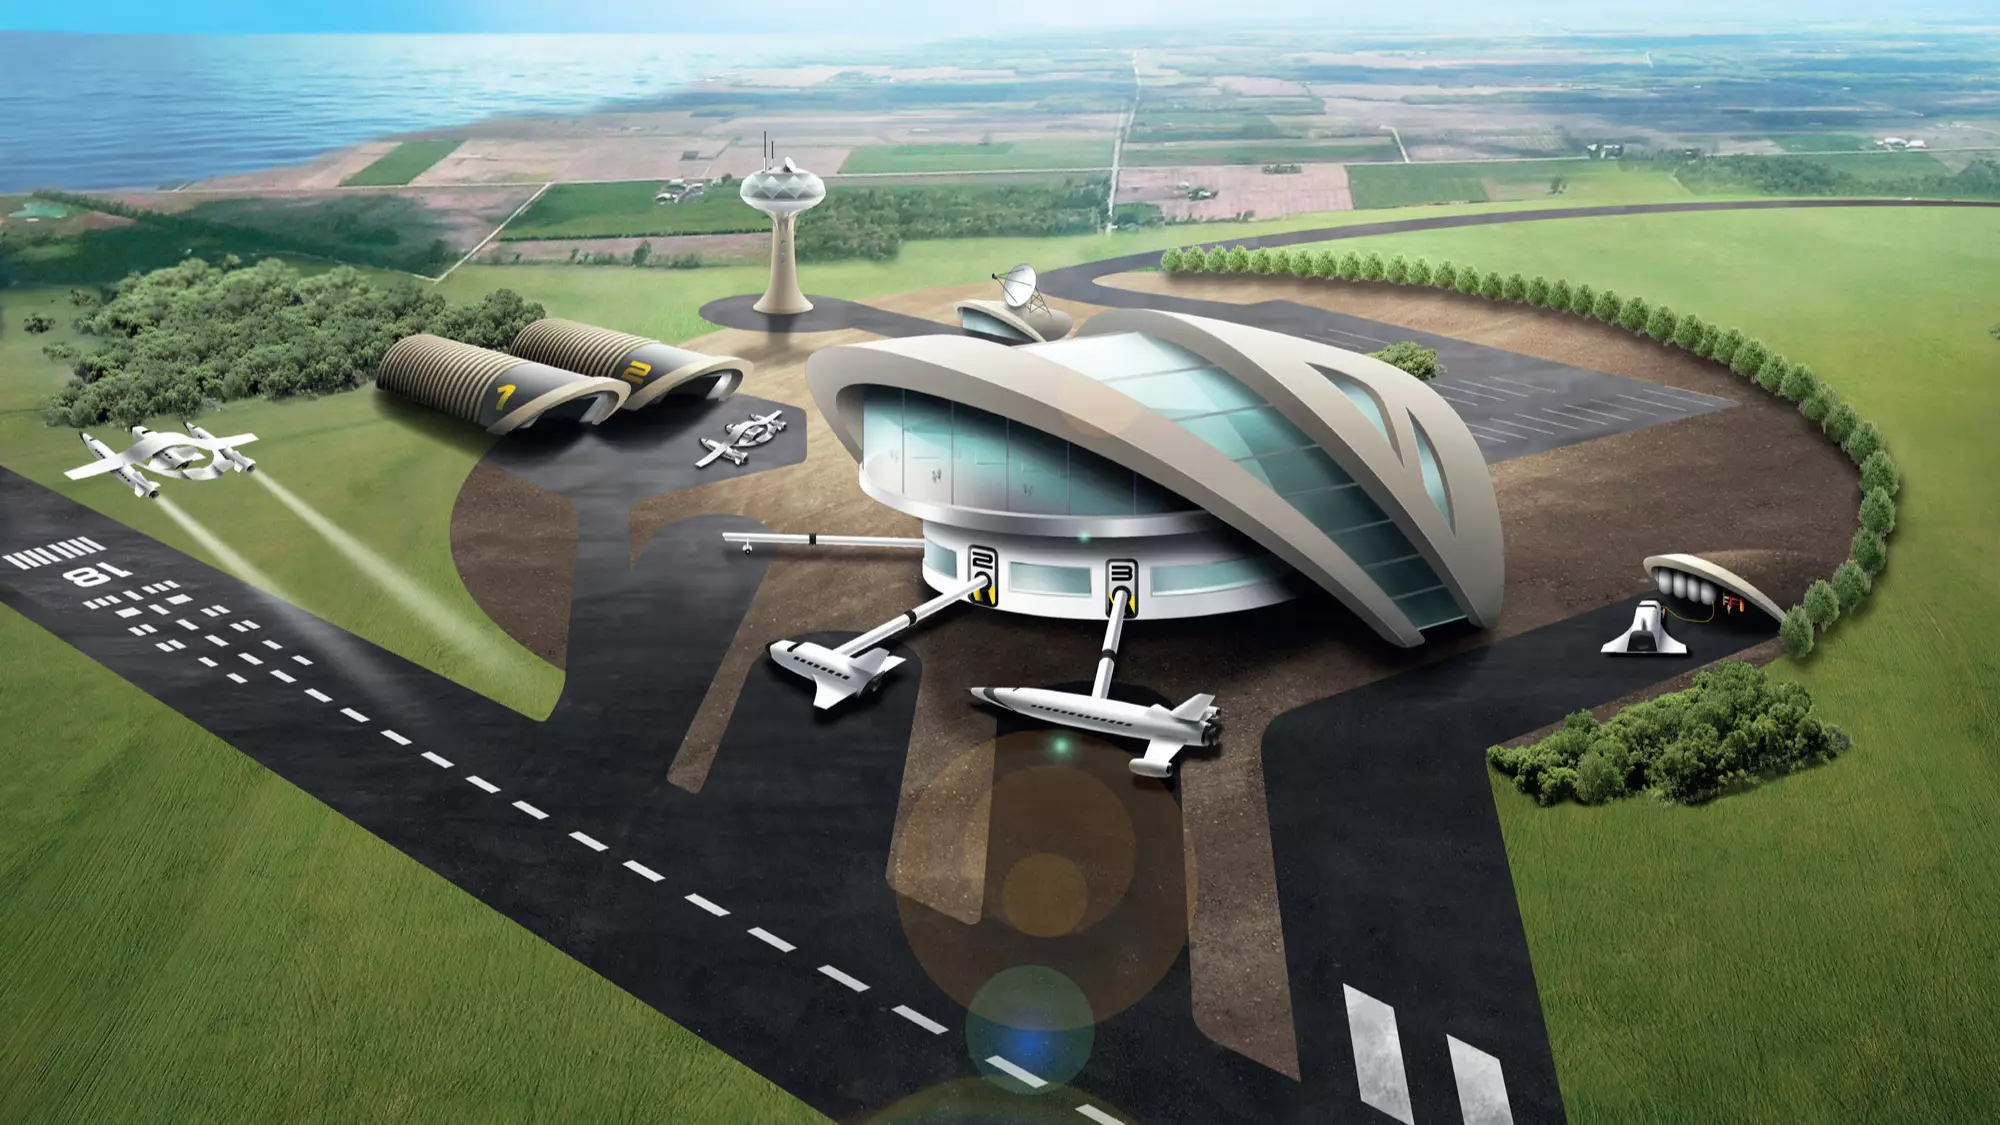 UK Space Agency Confirms New Spaceport To Be Built In Cornwall